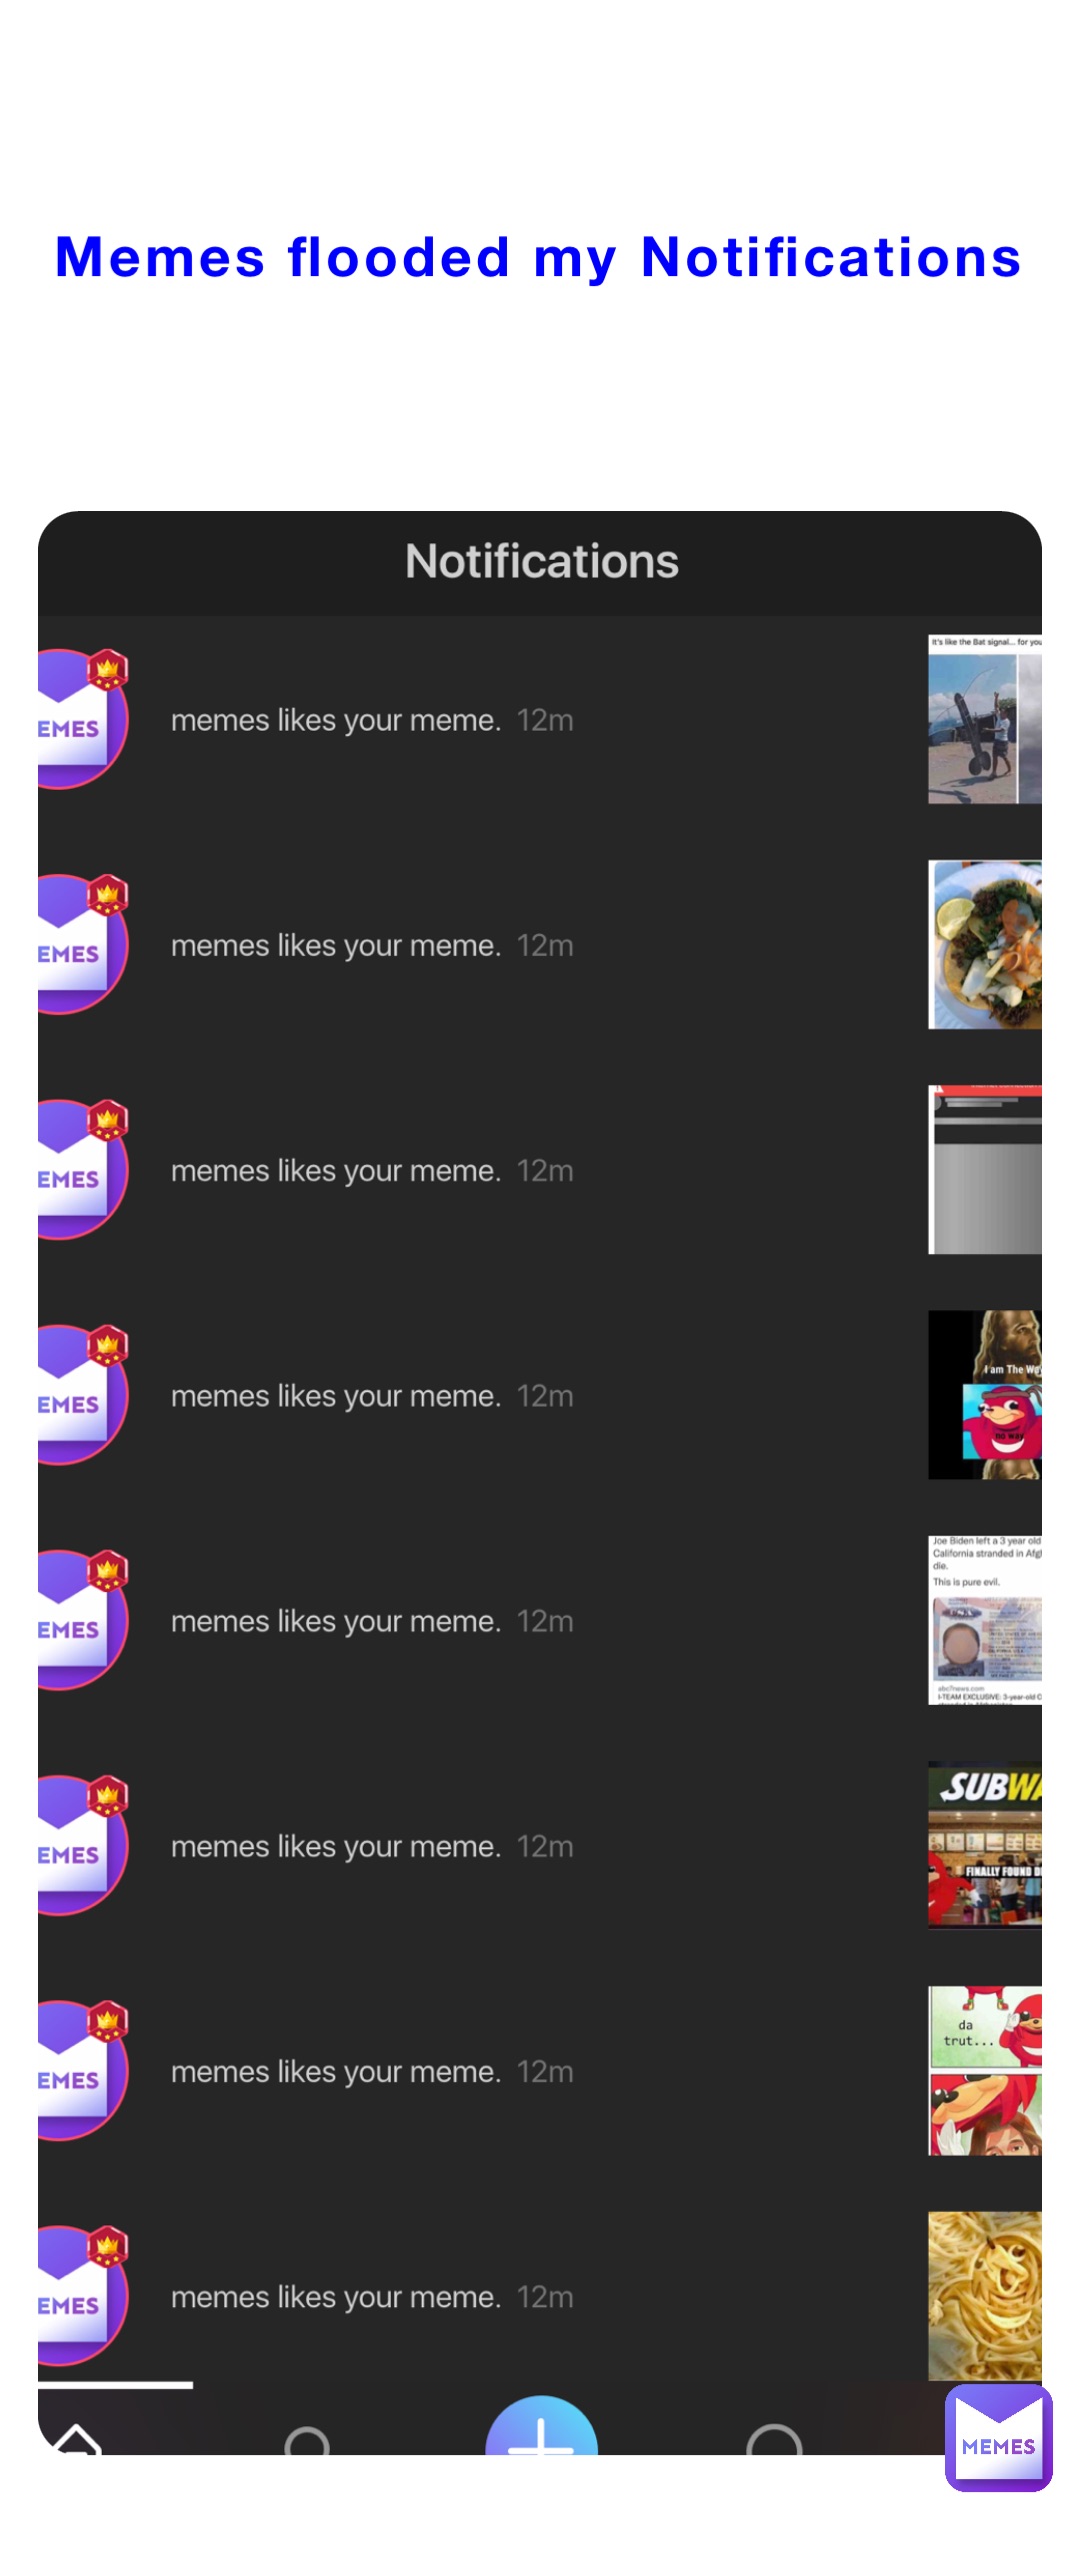 Memes flooded my Notifications